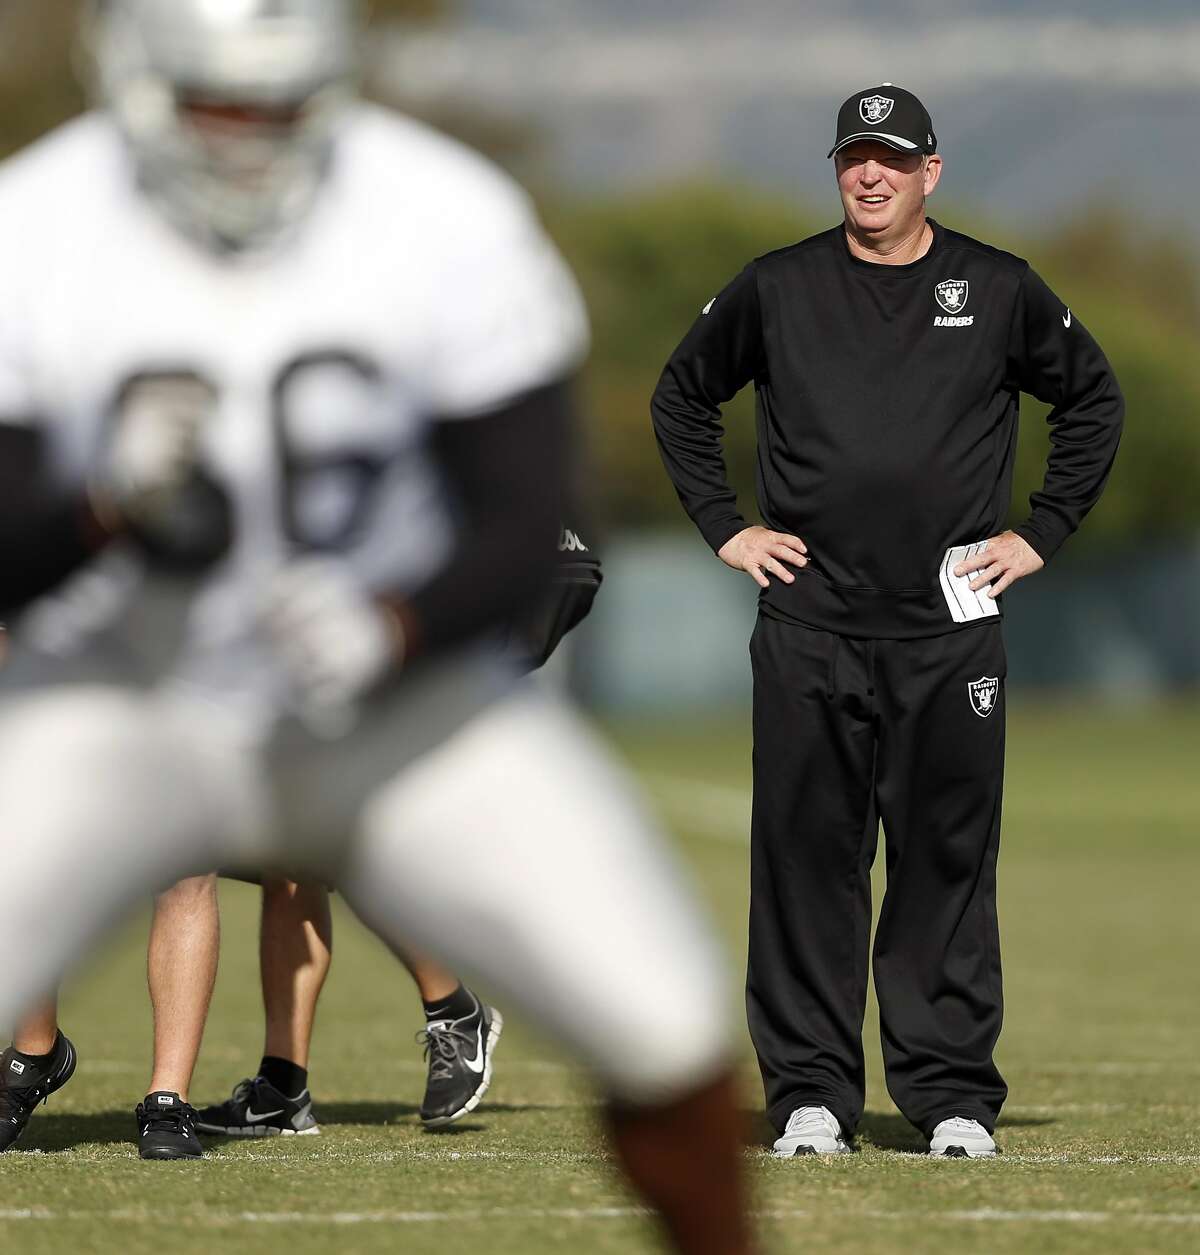 Oakland Raiders' Offensive Coordinator Bill Musgrave during practice in Alameda, Calif., on Thursday, November 5, 2015.